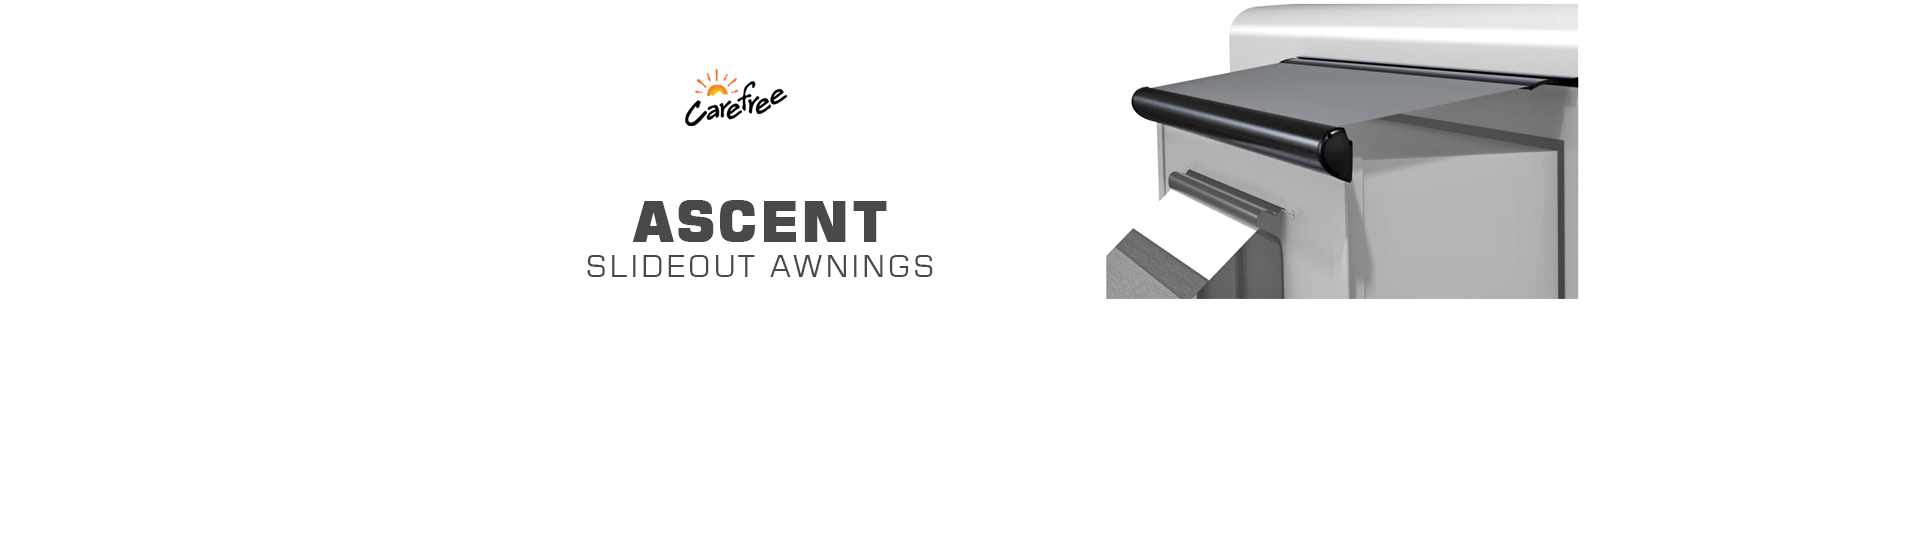 Carefree Ascent Awning